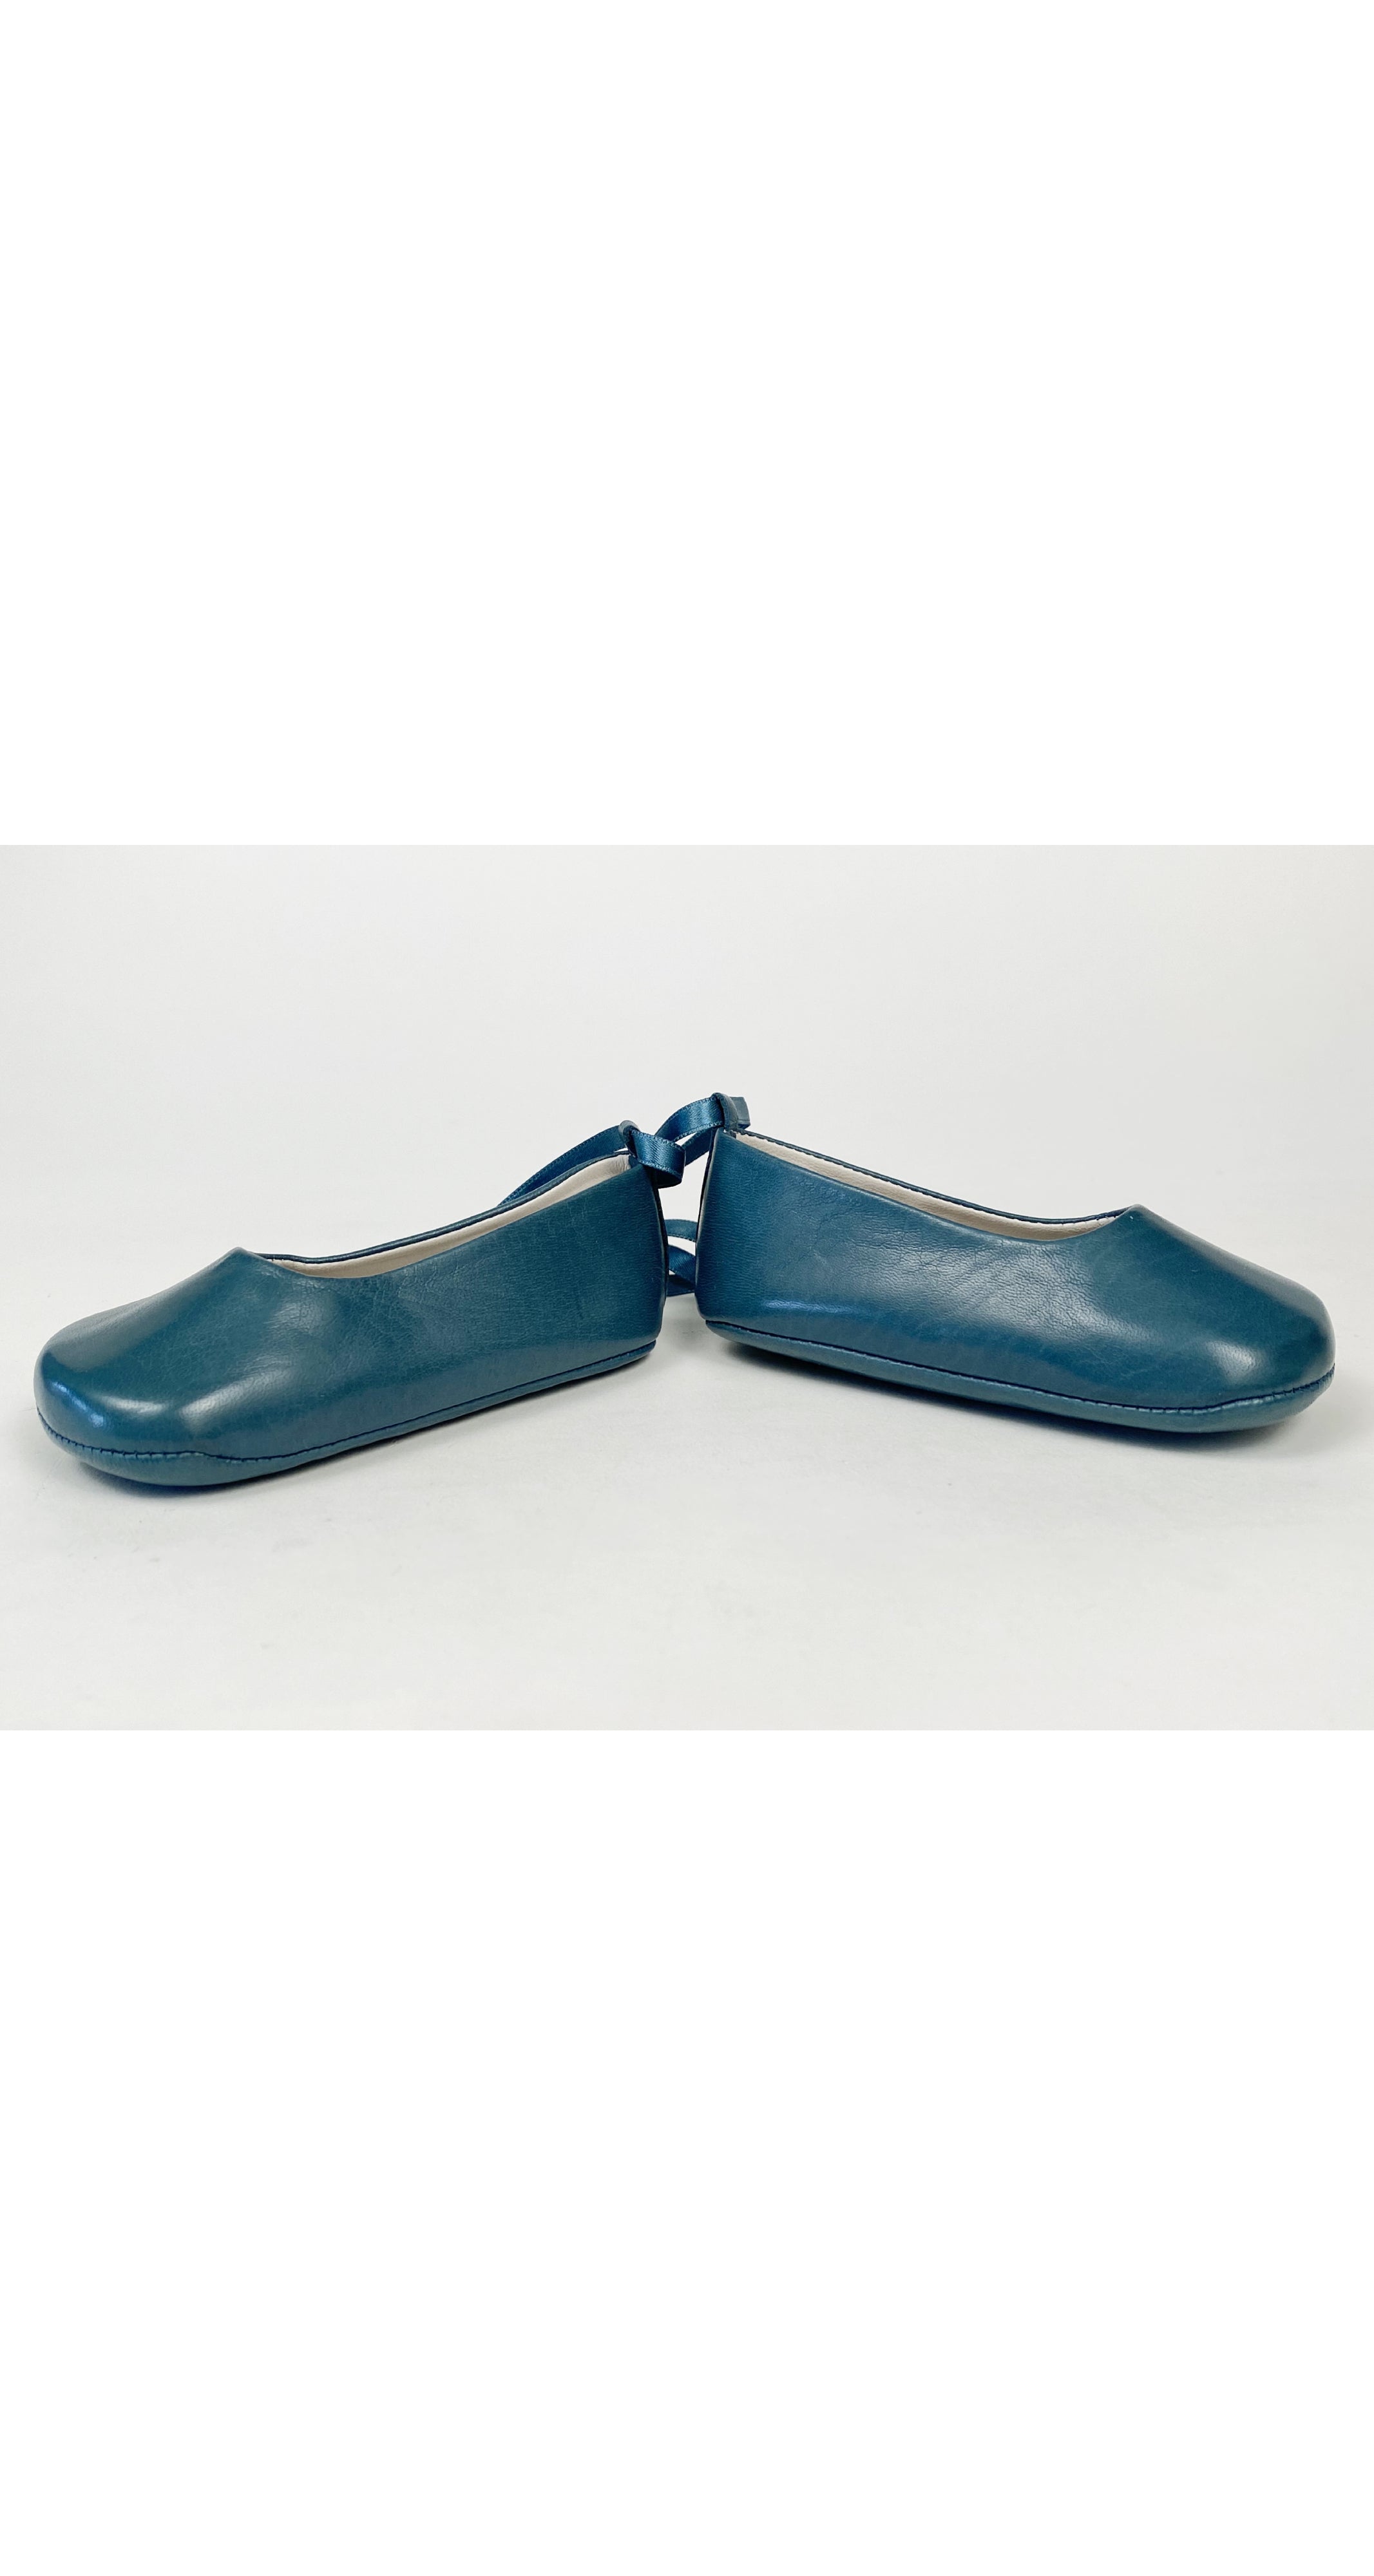 2000s NOS Teal Lambskin Lace-Up Ballet Shoes